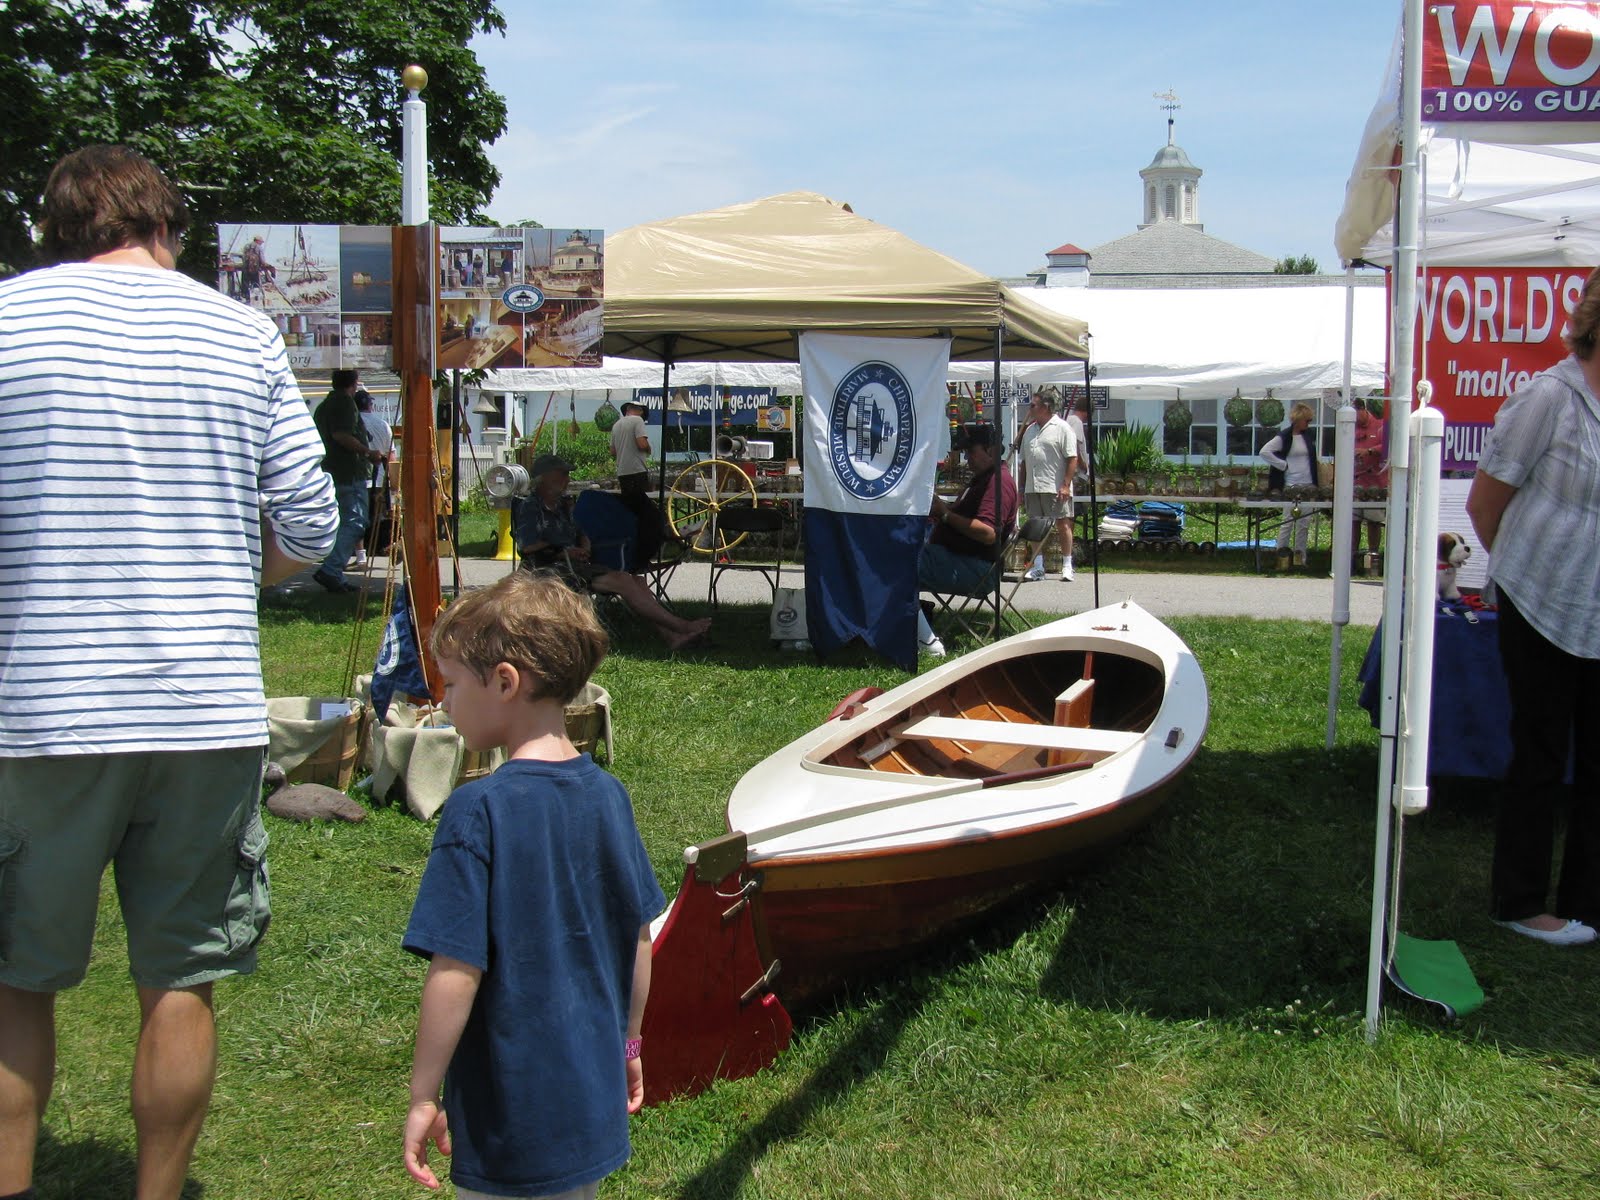 cbmm participated at the wooden boat show at mystic 2011